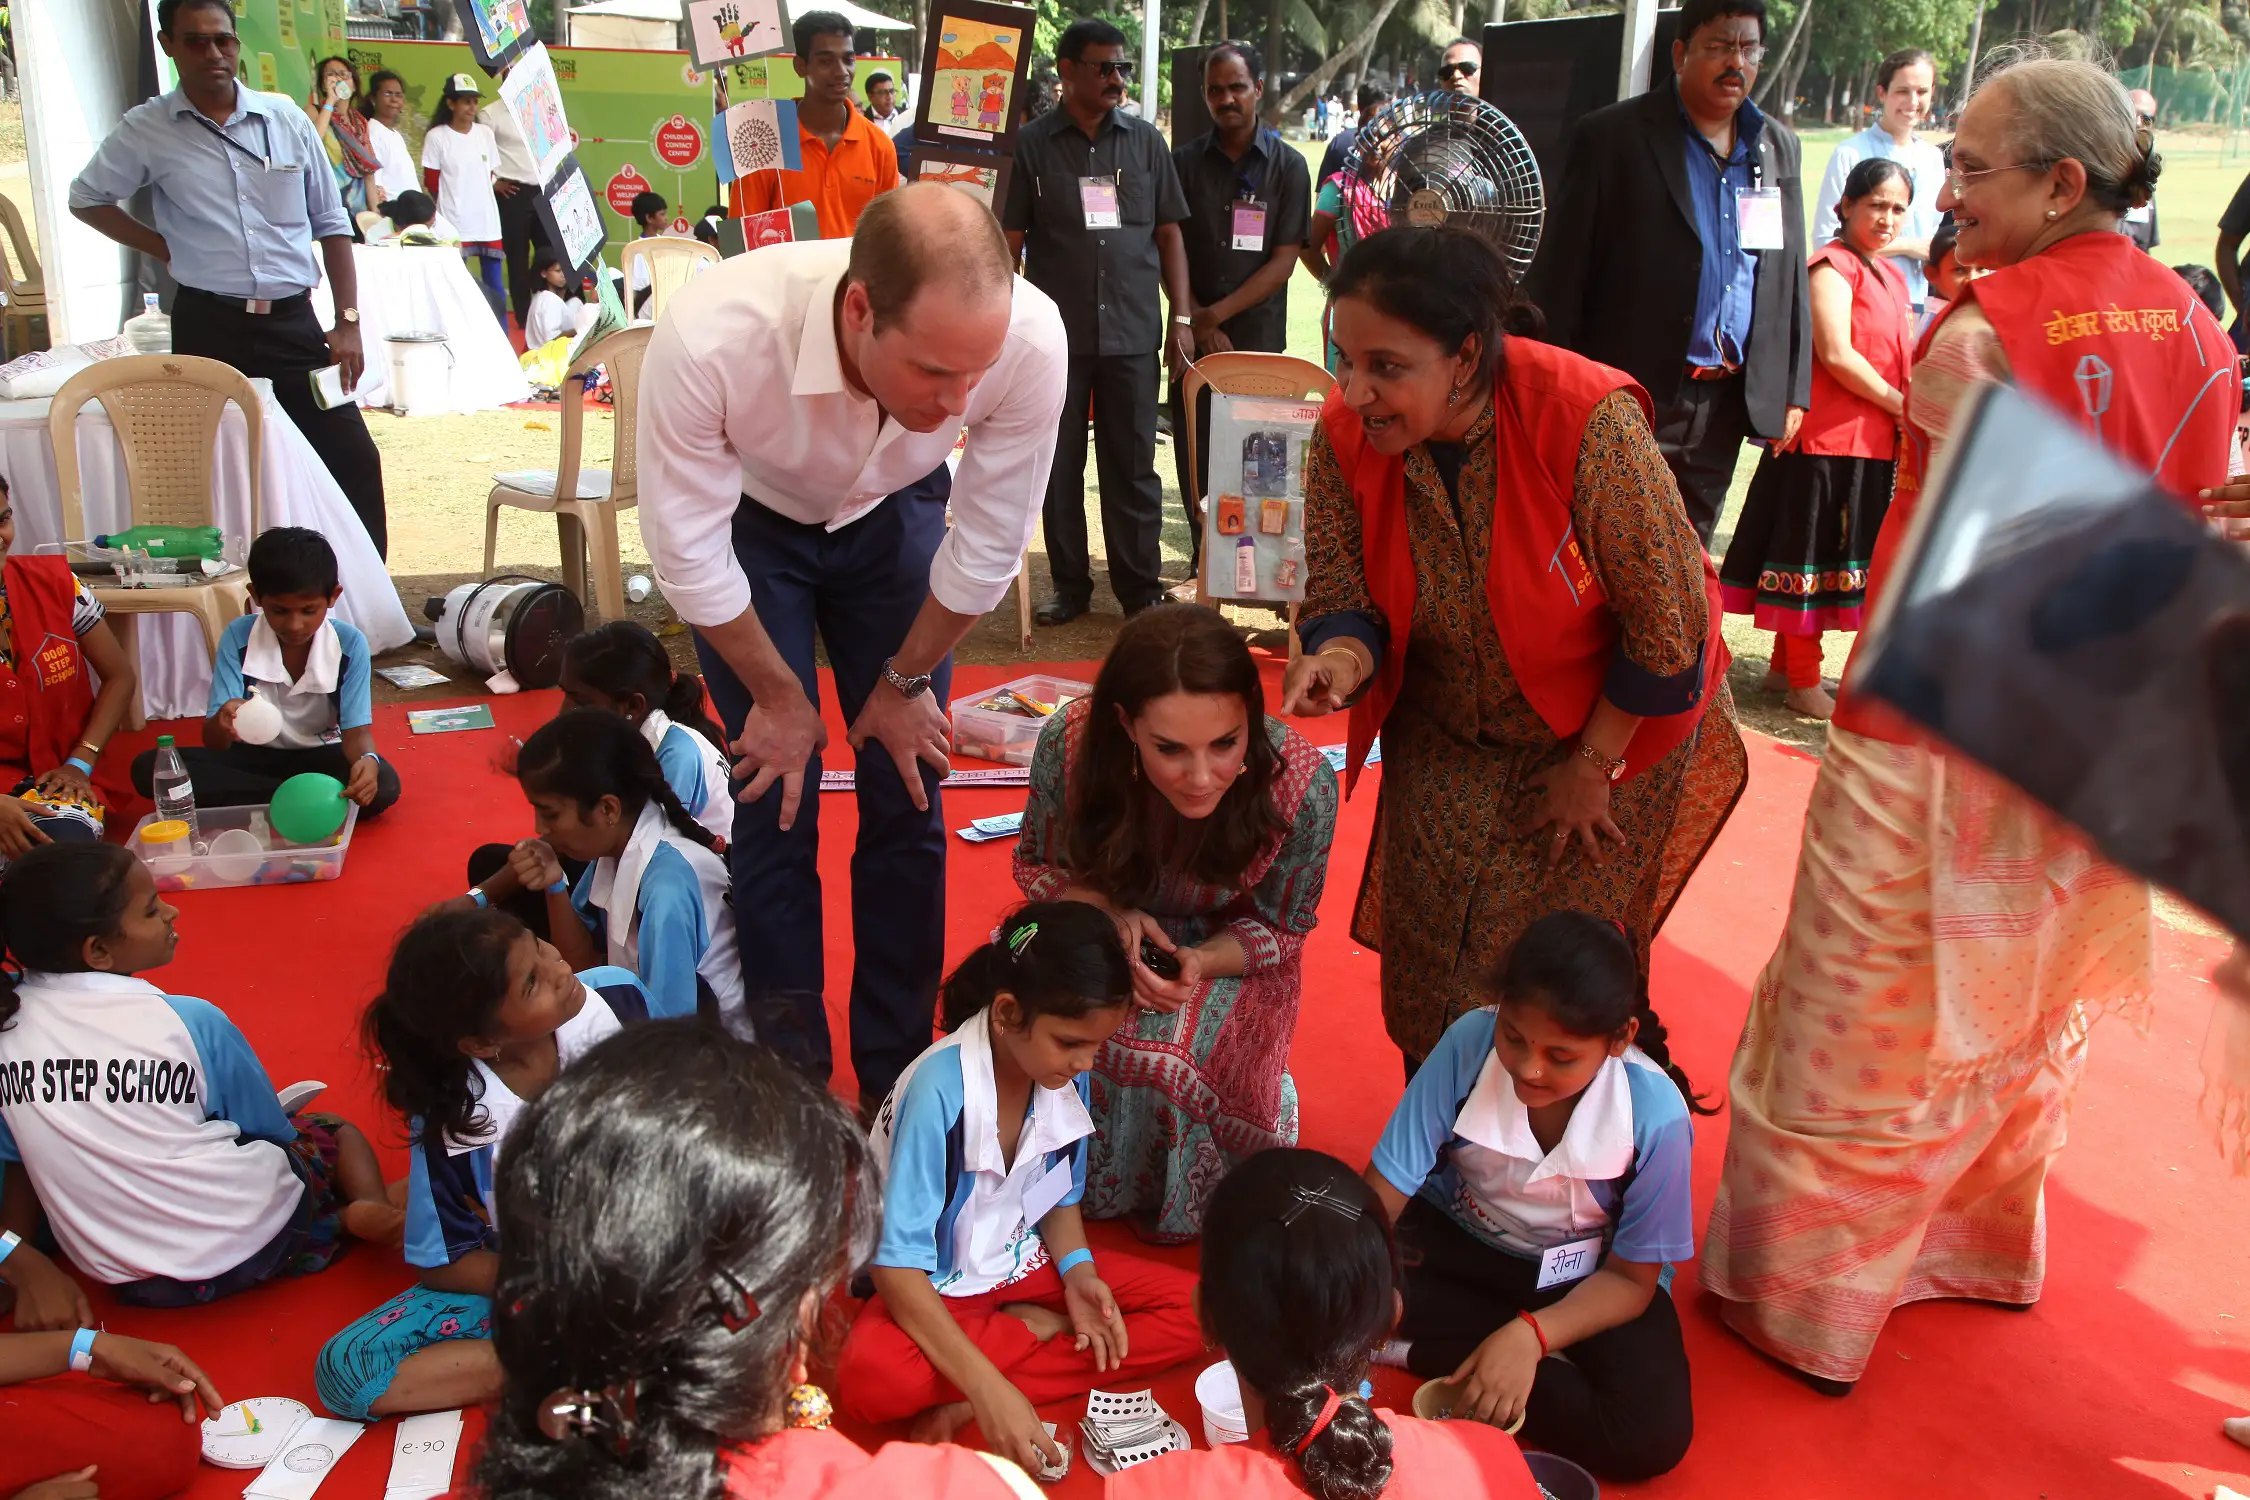 The Duke and Duchess of Cambridge met with the children from , Childline, Magic Bus and Doorstep